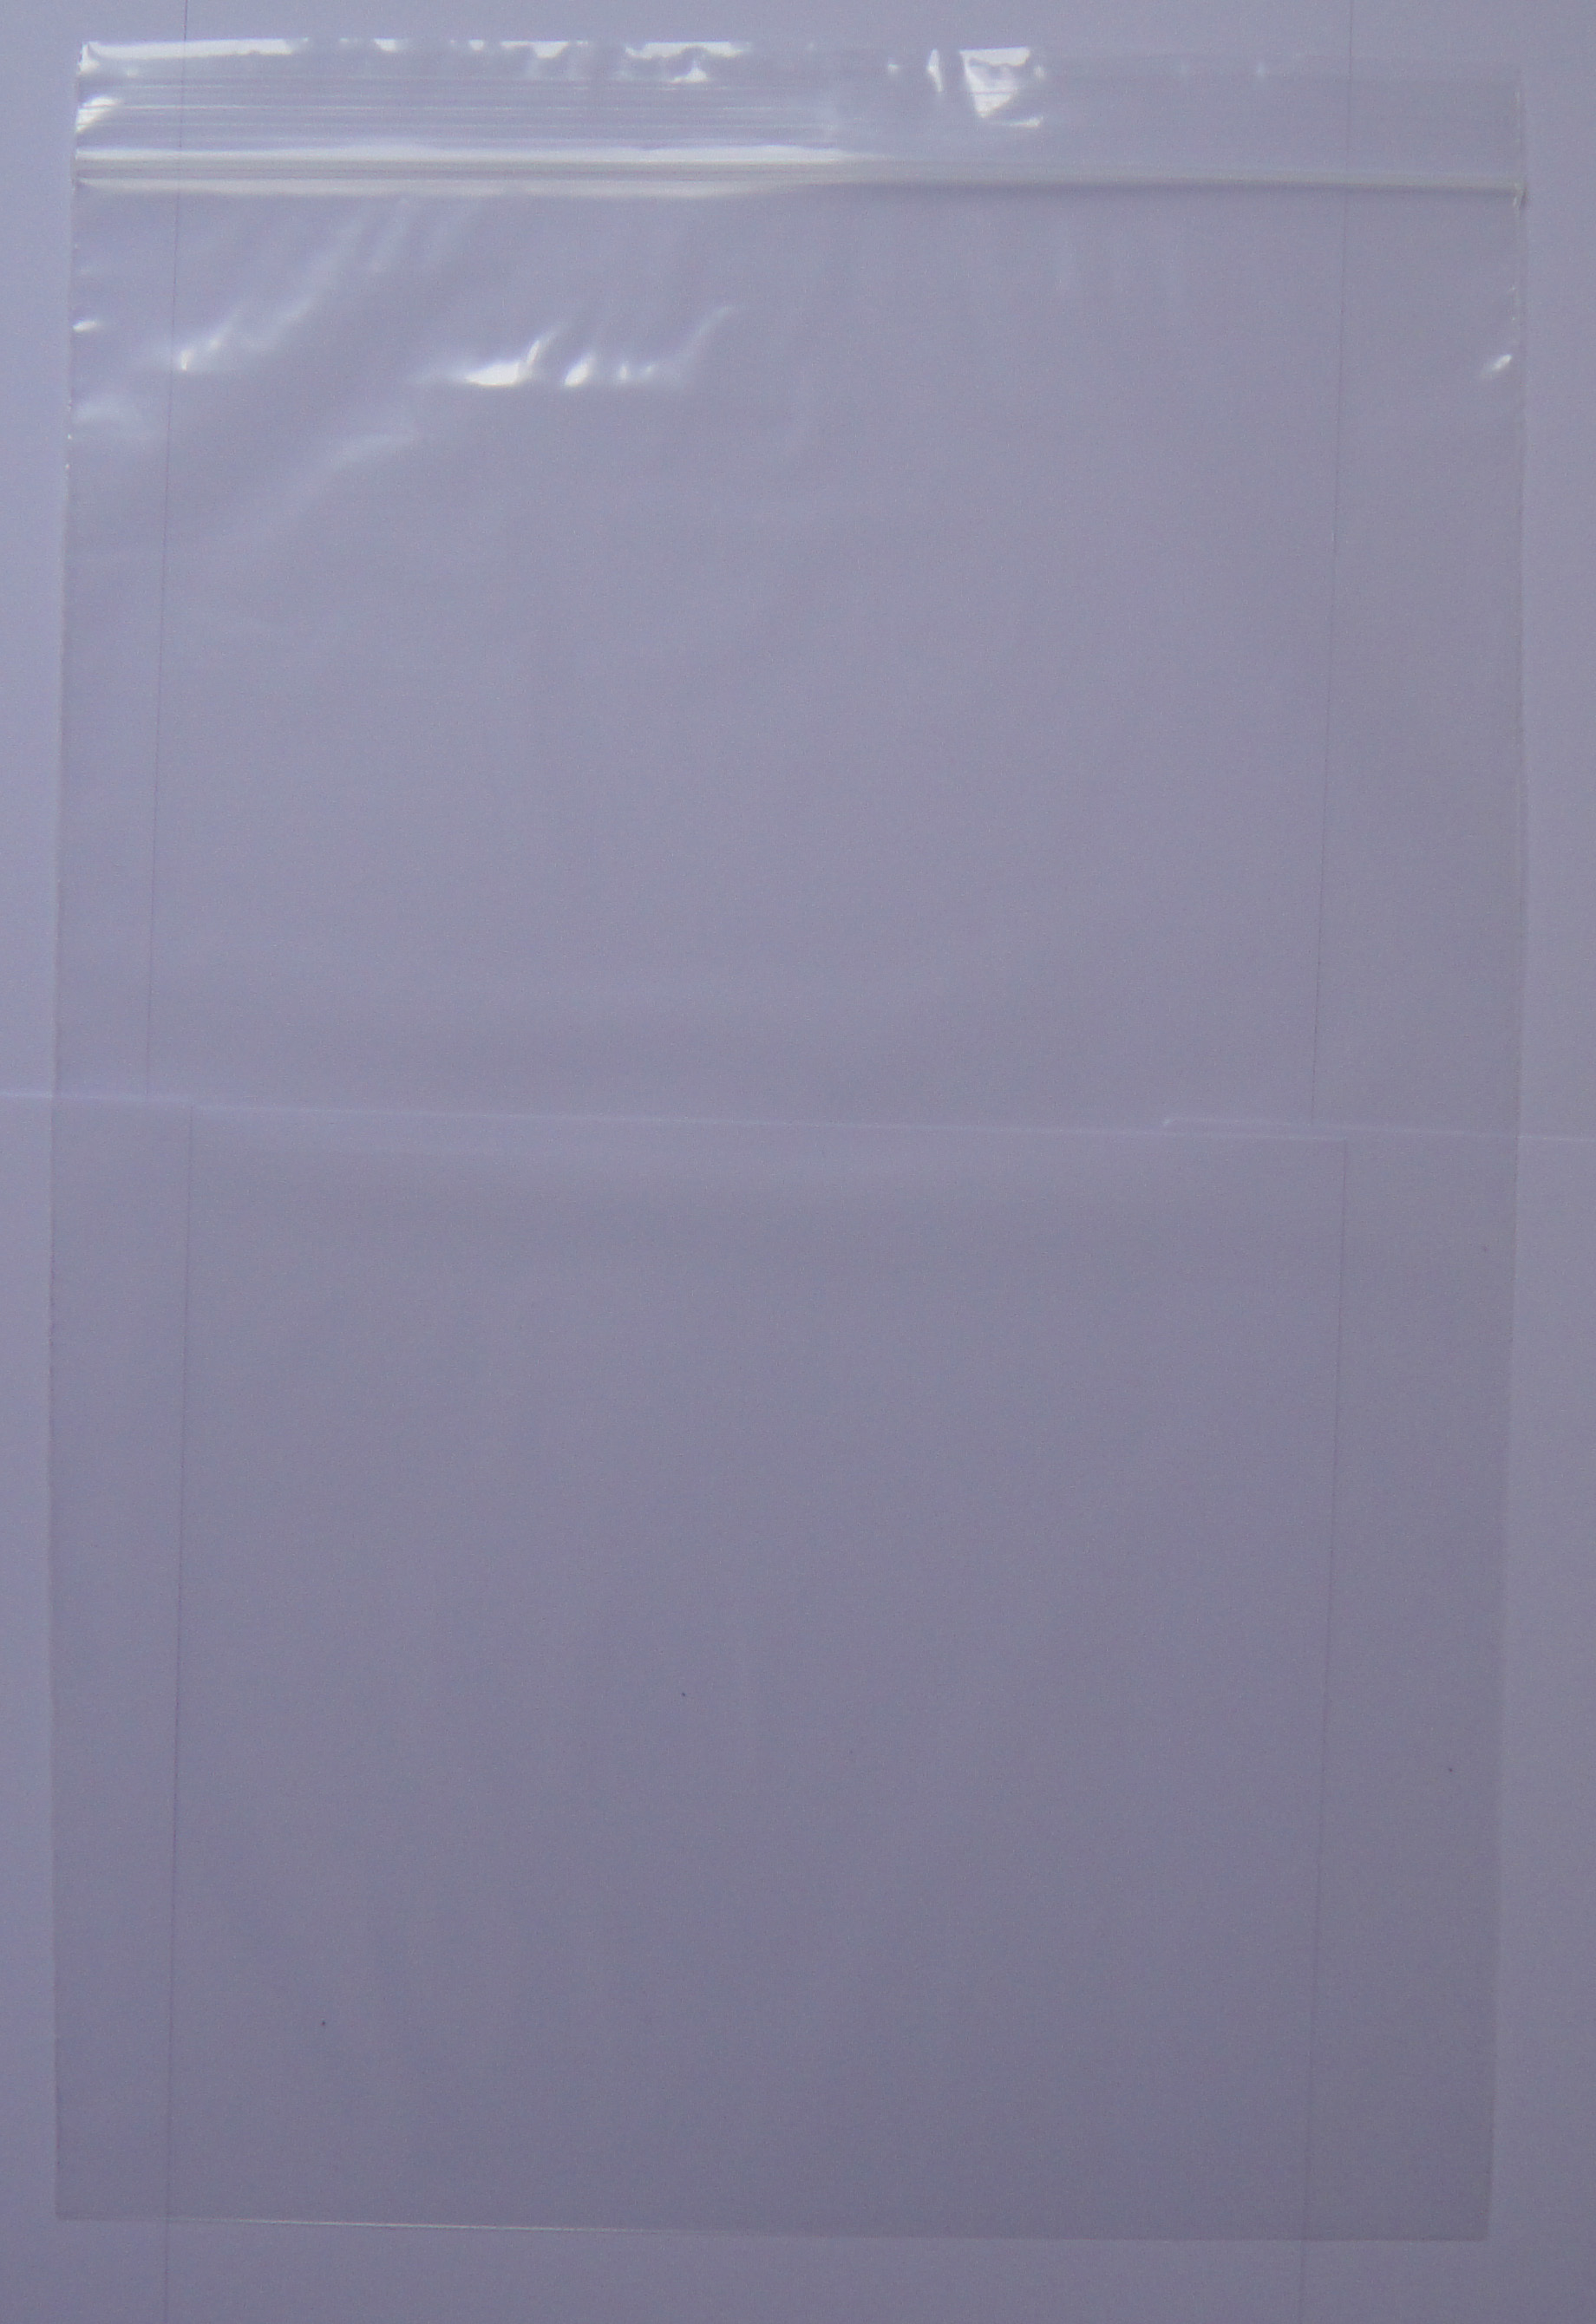 2000 Resealable Plastic Grip Seal Bags 2 x 9 GL105 